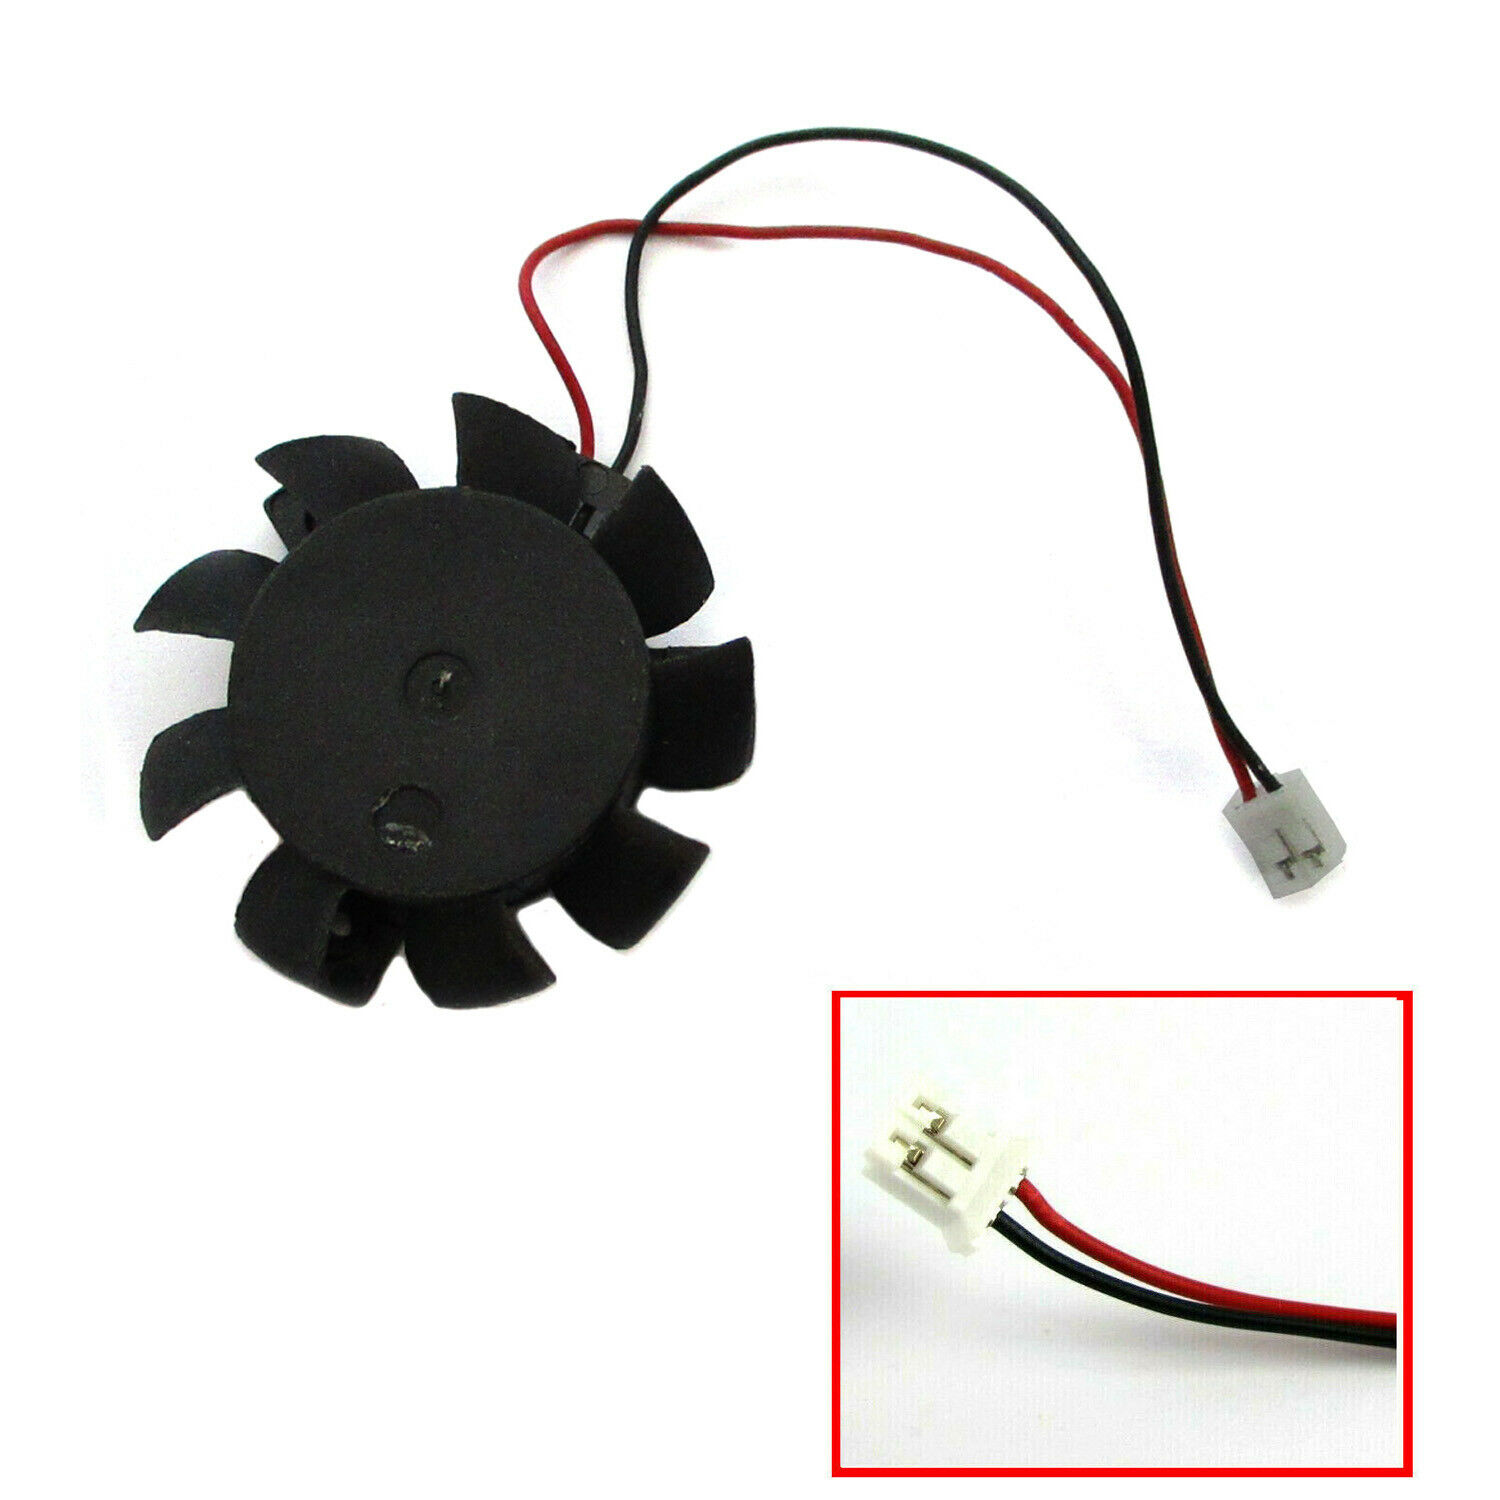 Vga Video Card Fan Replacement 37mm 2pin For Asus Ati Nvidia 12v 0.1a T124010dl